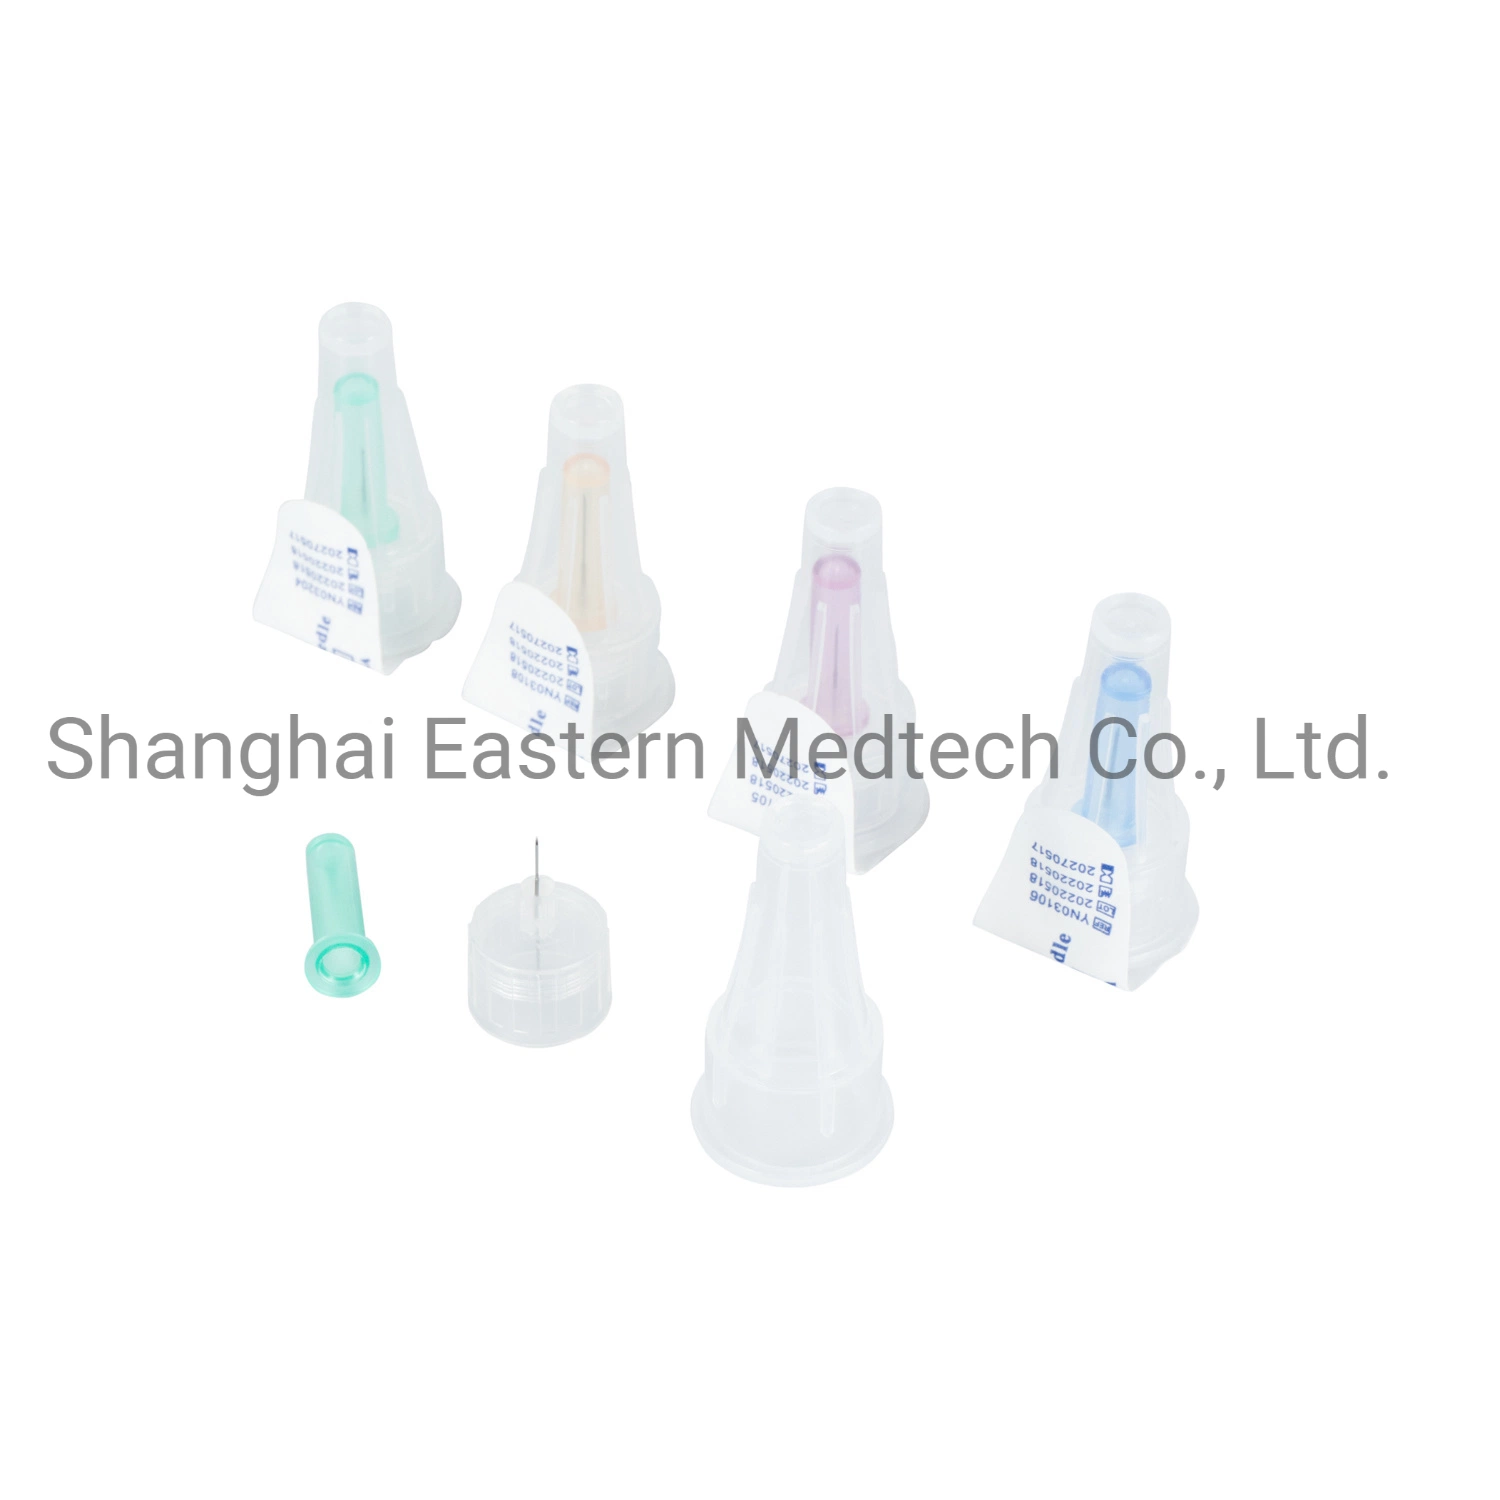 Wholesale Medical Supply 32gx4mm CE Marked Fine Needle Disposable Medical Instrument Insulin Pen Needles